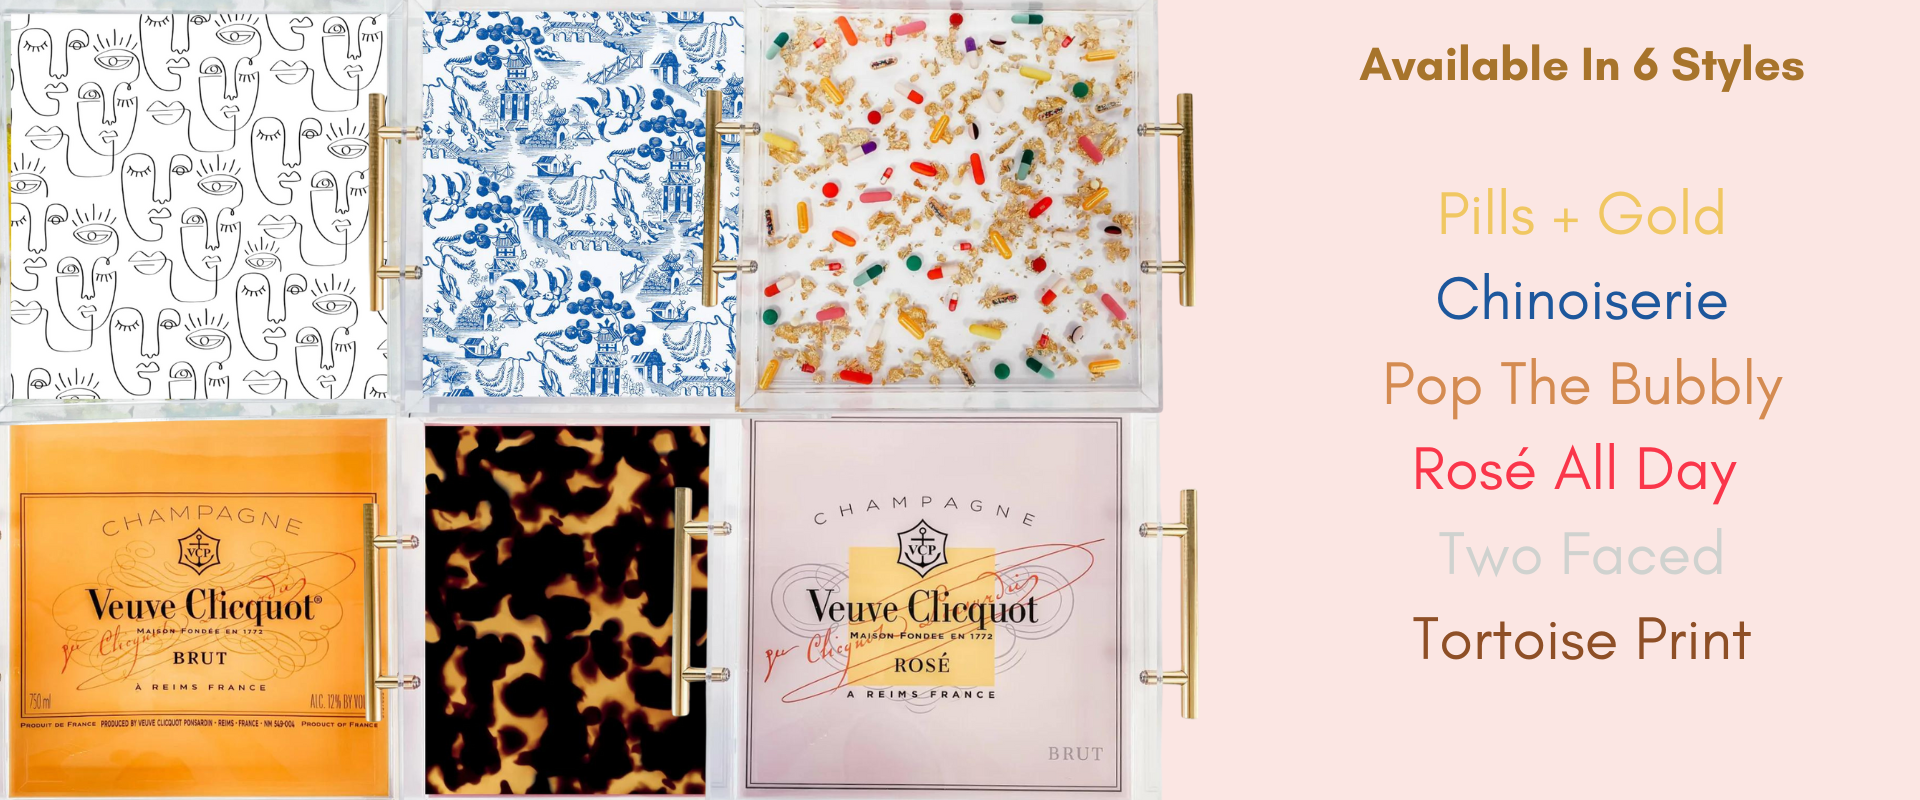 Pills + Gold, Chinoiserie, Pop the Bubbly, Rose all Day, Two faced, Tortoise Print. Large trays different styles.